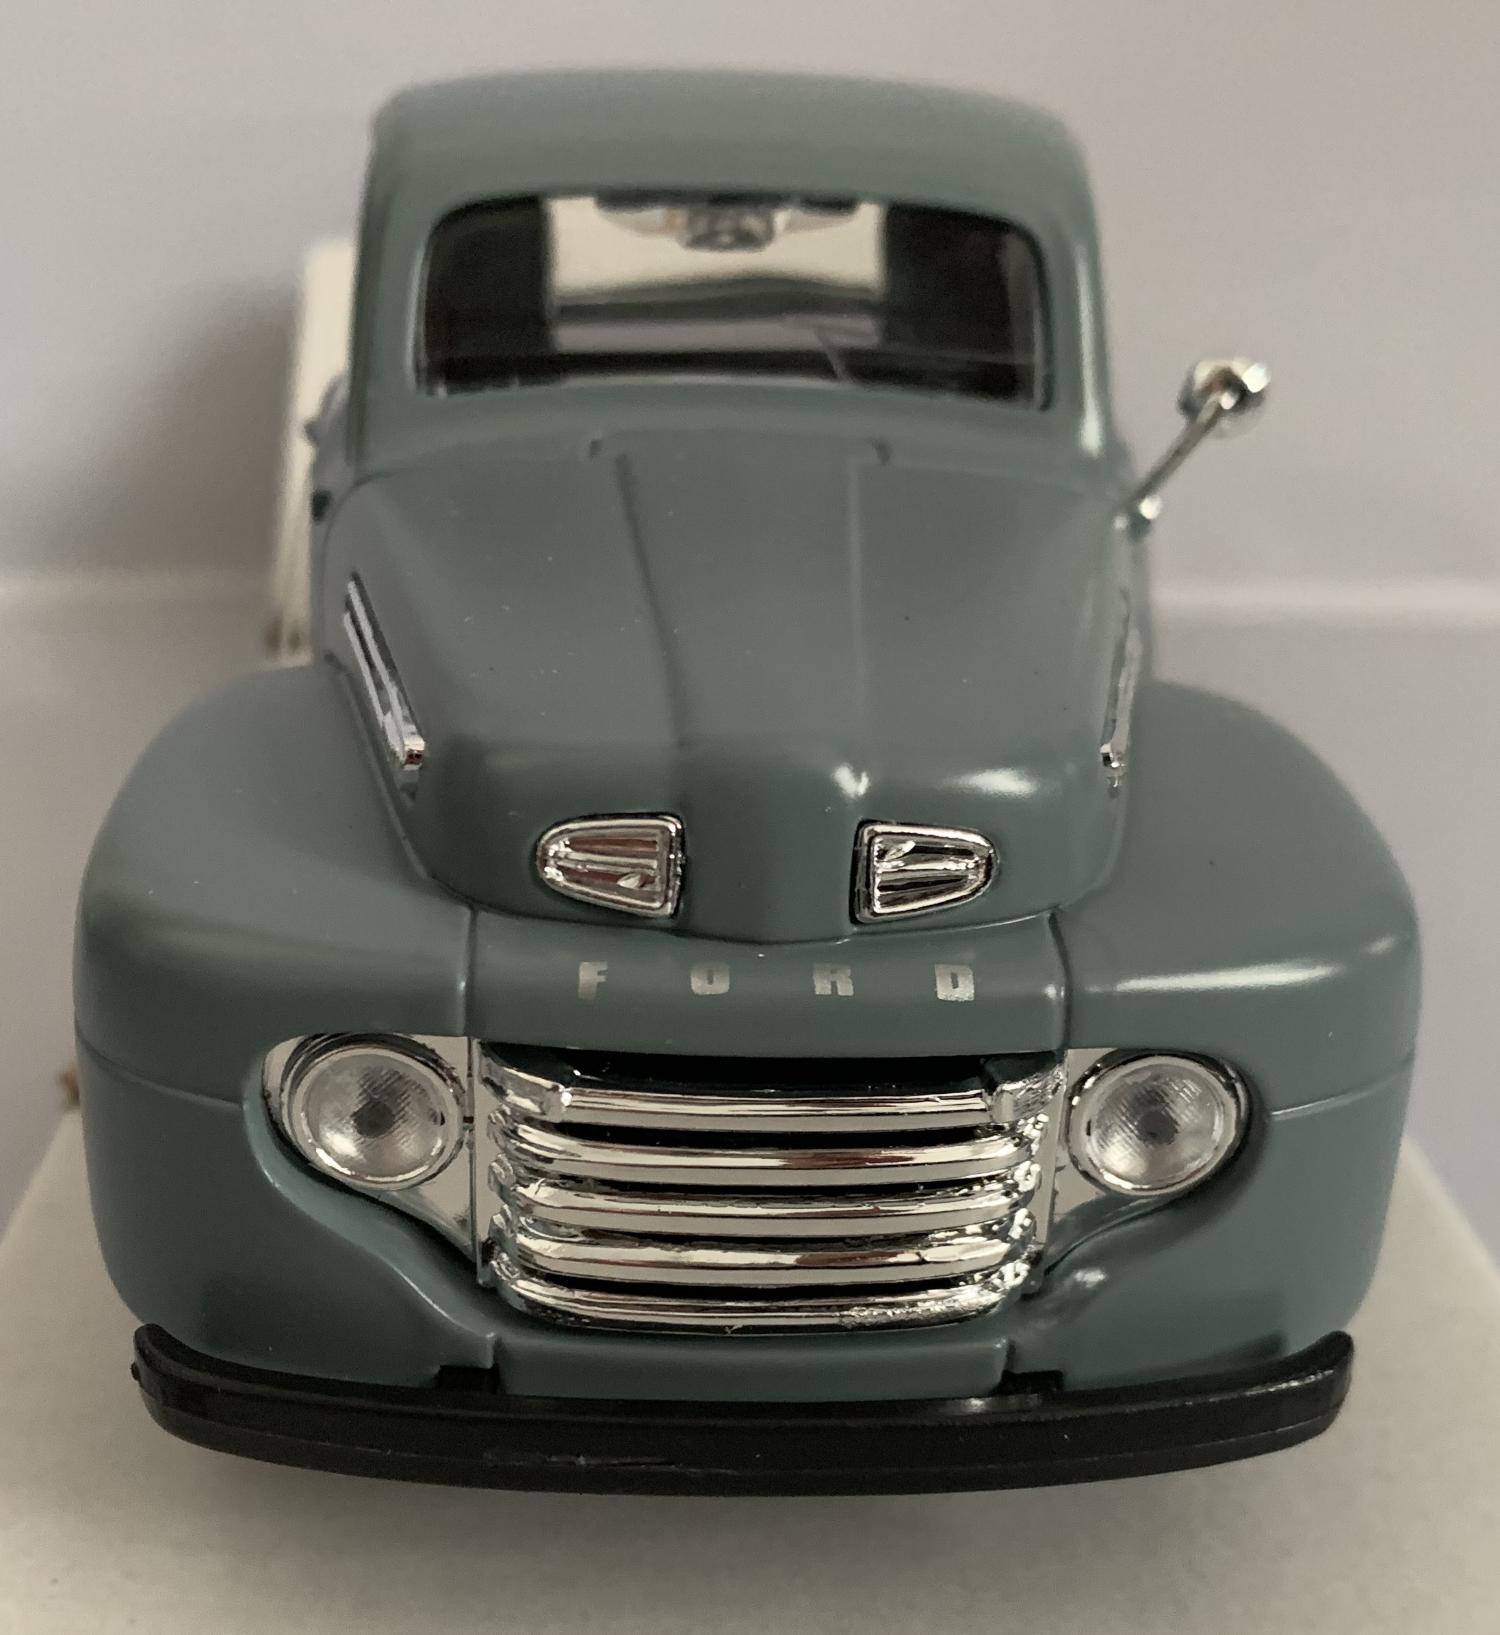 Ford F-1 Pickup 1948 in grey 1:25 scale model from Maisto, MAi31935